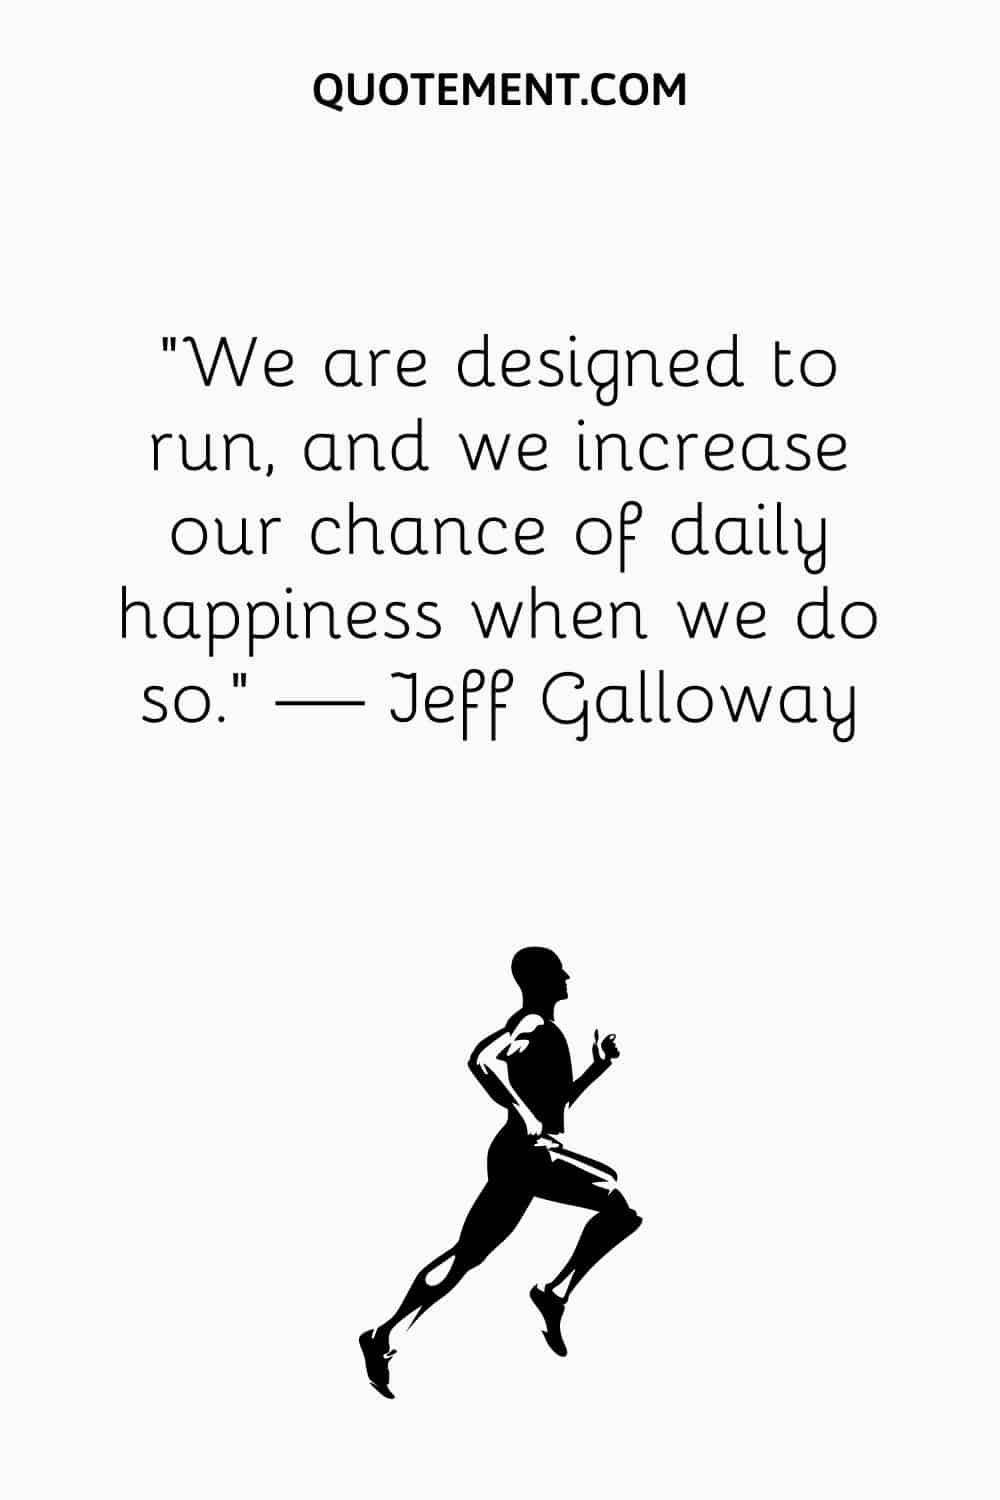 We are designed to run, and we increase our chance of daily happiness when we do so